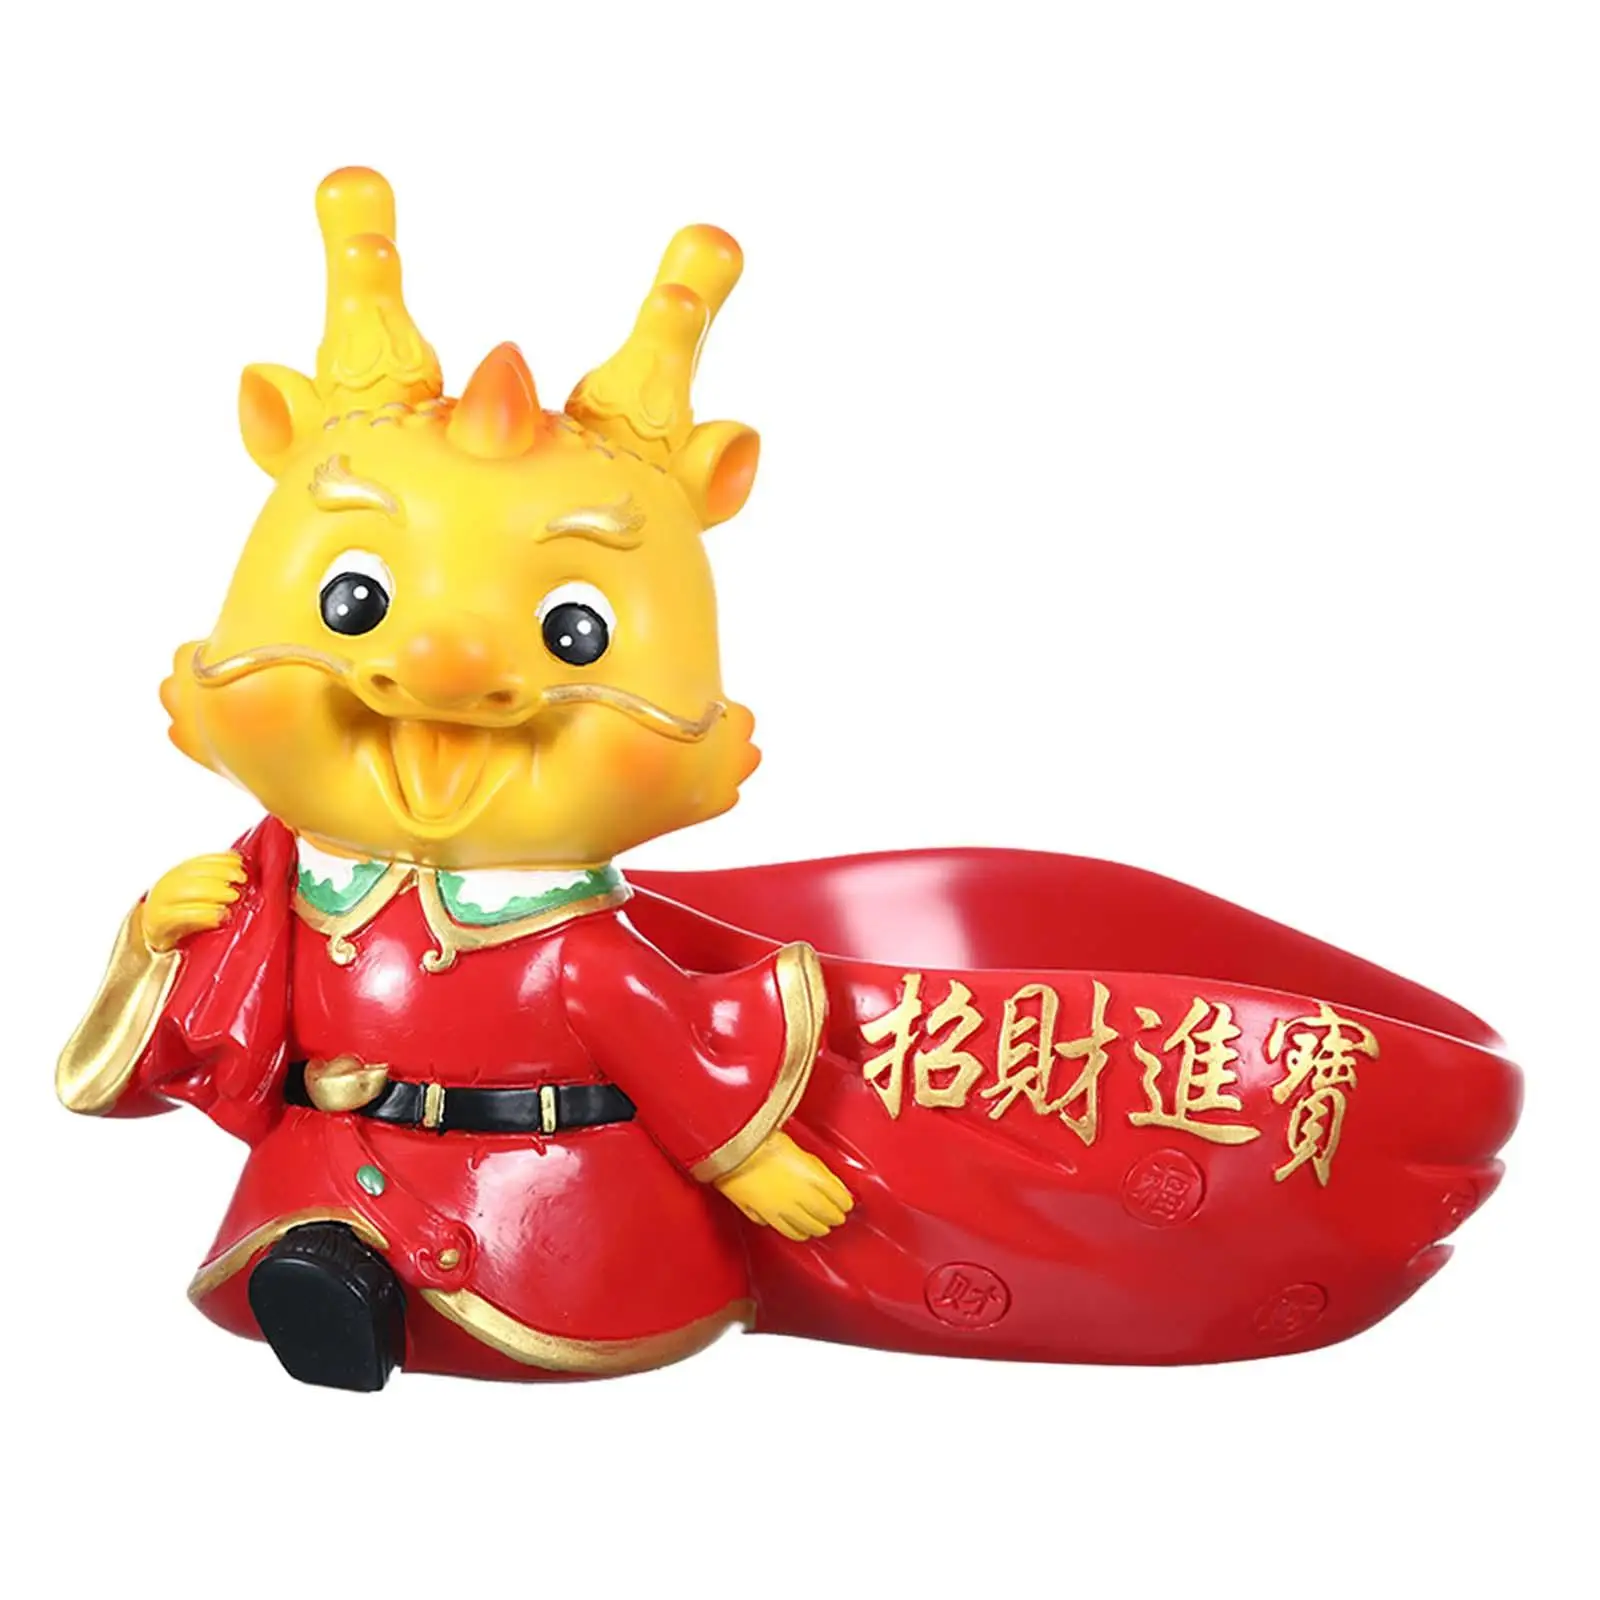 Chinese New Year Dragon Figurine Tray Creative for Cabinet Entrance Desktop